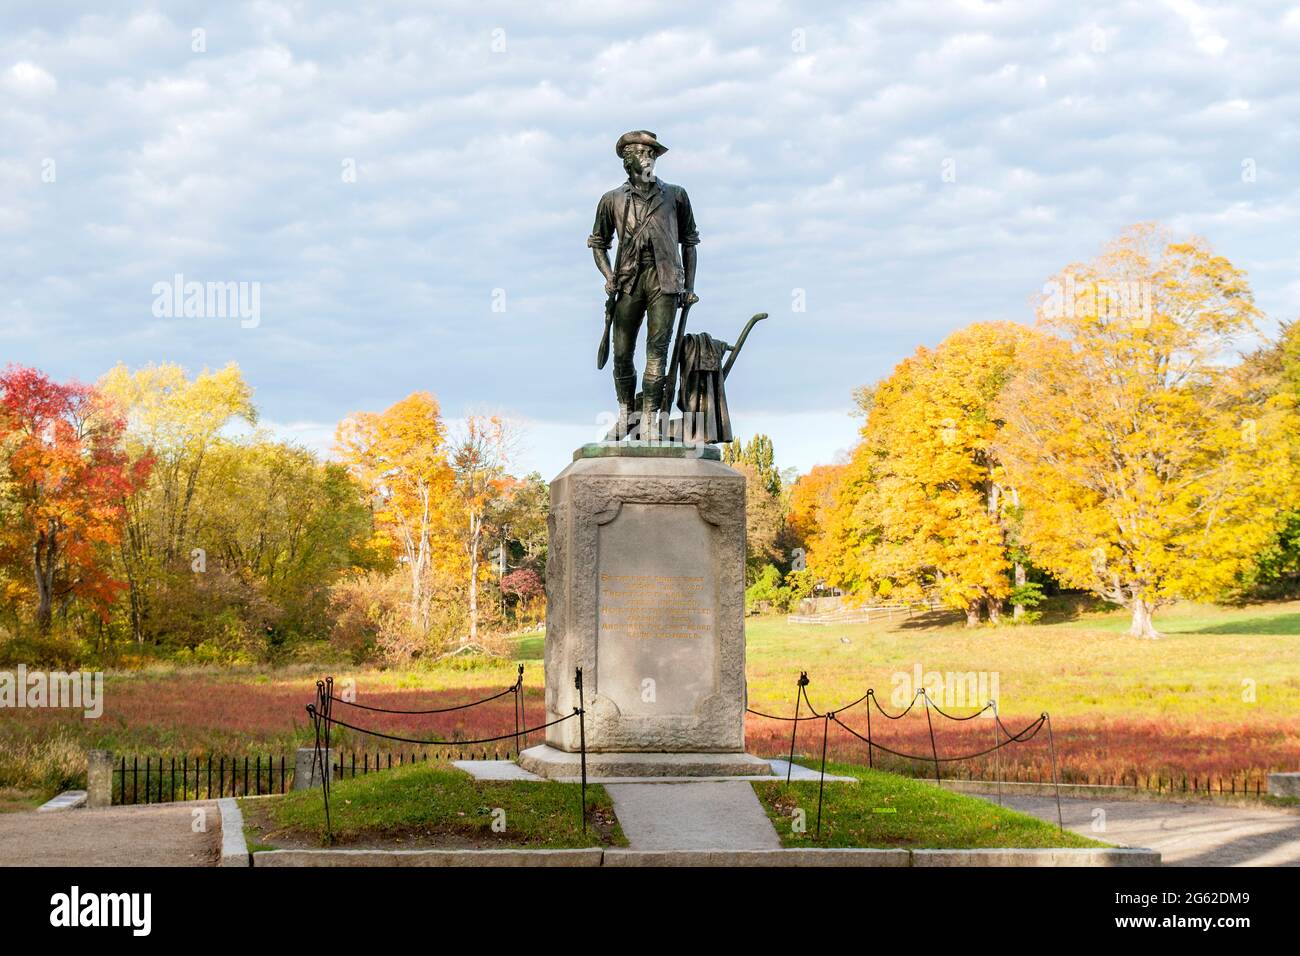 Minuteman monument, located at Minuteman National Park in Concord Massachusetts.  Sculpted by Daniel Chester French in 1875 to commemorate the 100th a Stock Photo